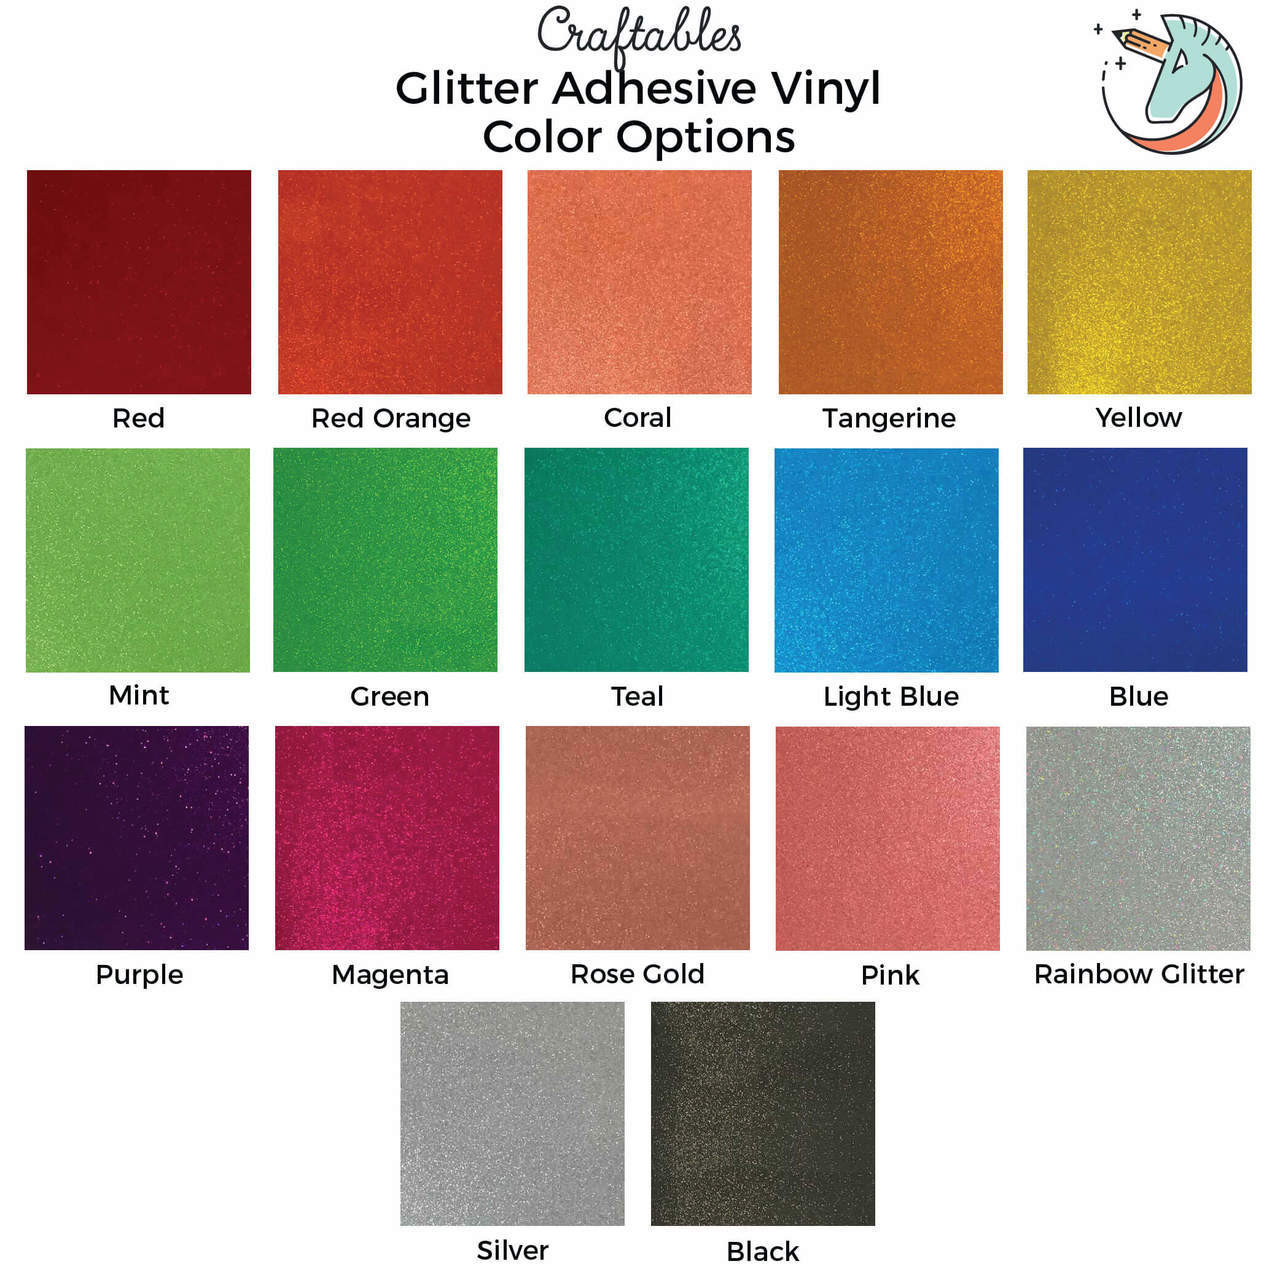 Light Pink Glitter Adhesive Vinyl Sheets By Craftables